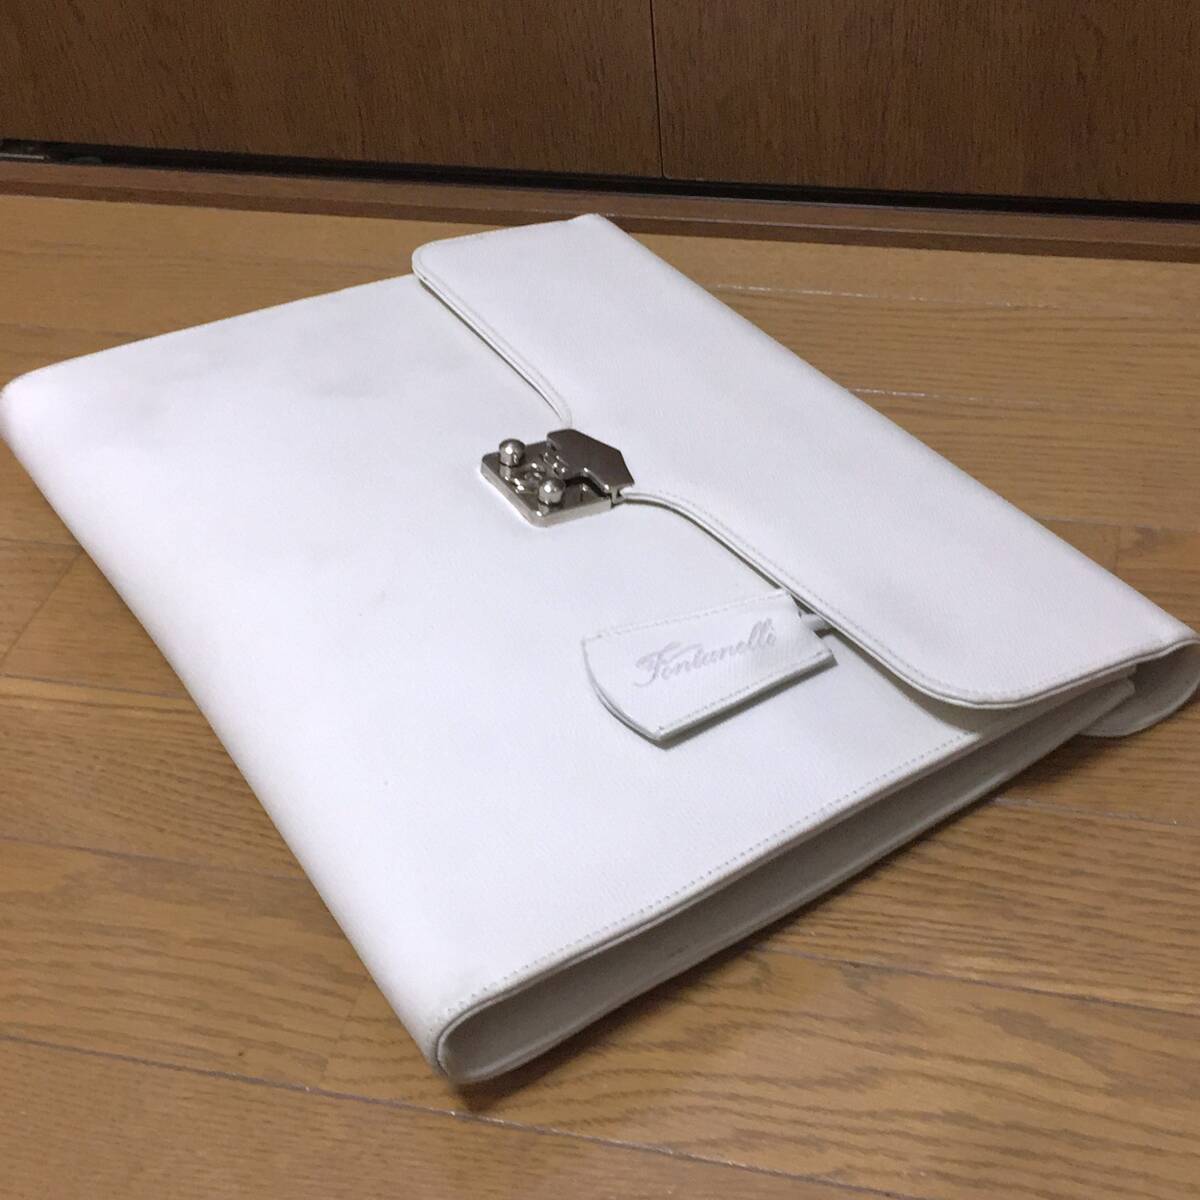  high class Fontanell iphone taneli Italy made cow leather safia-no leather business clutch bag document bag men's white series eggshell white key attaching 